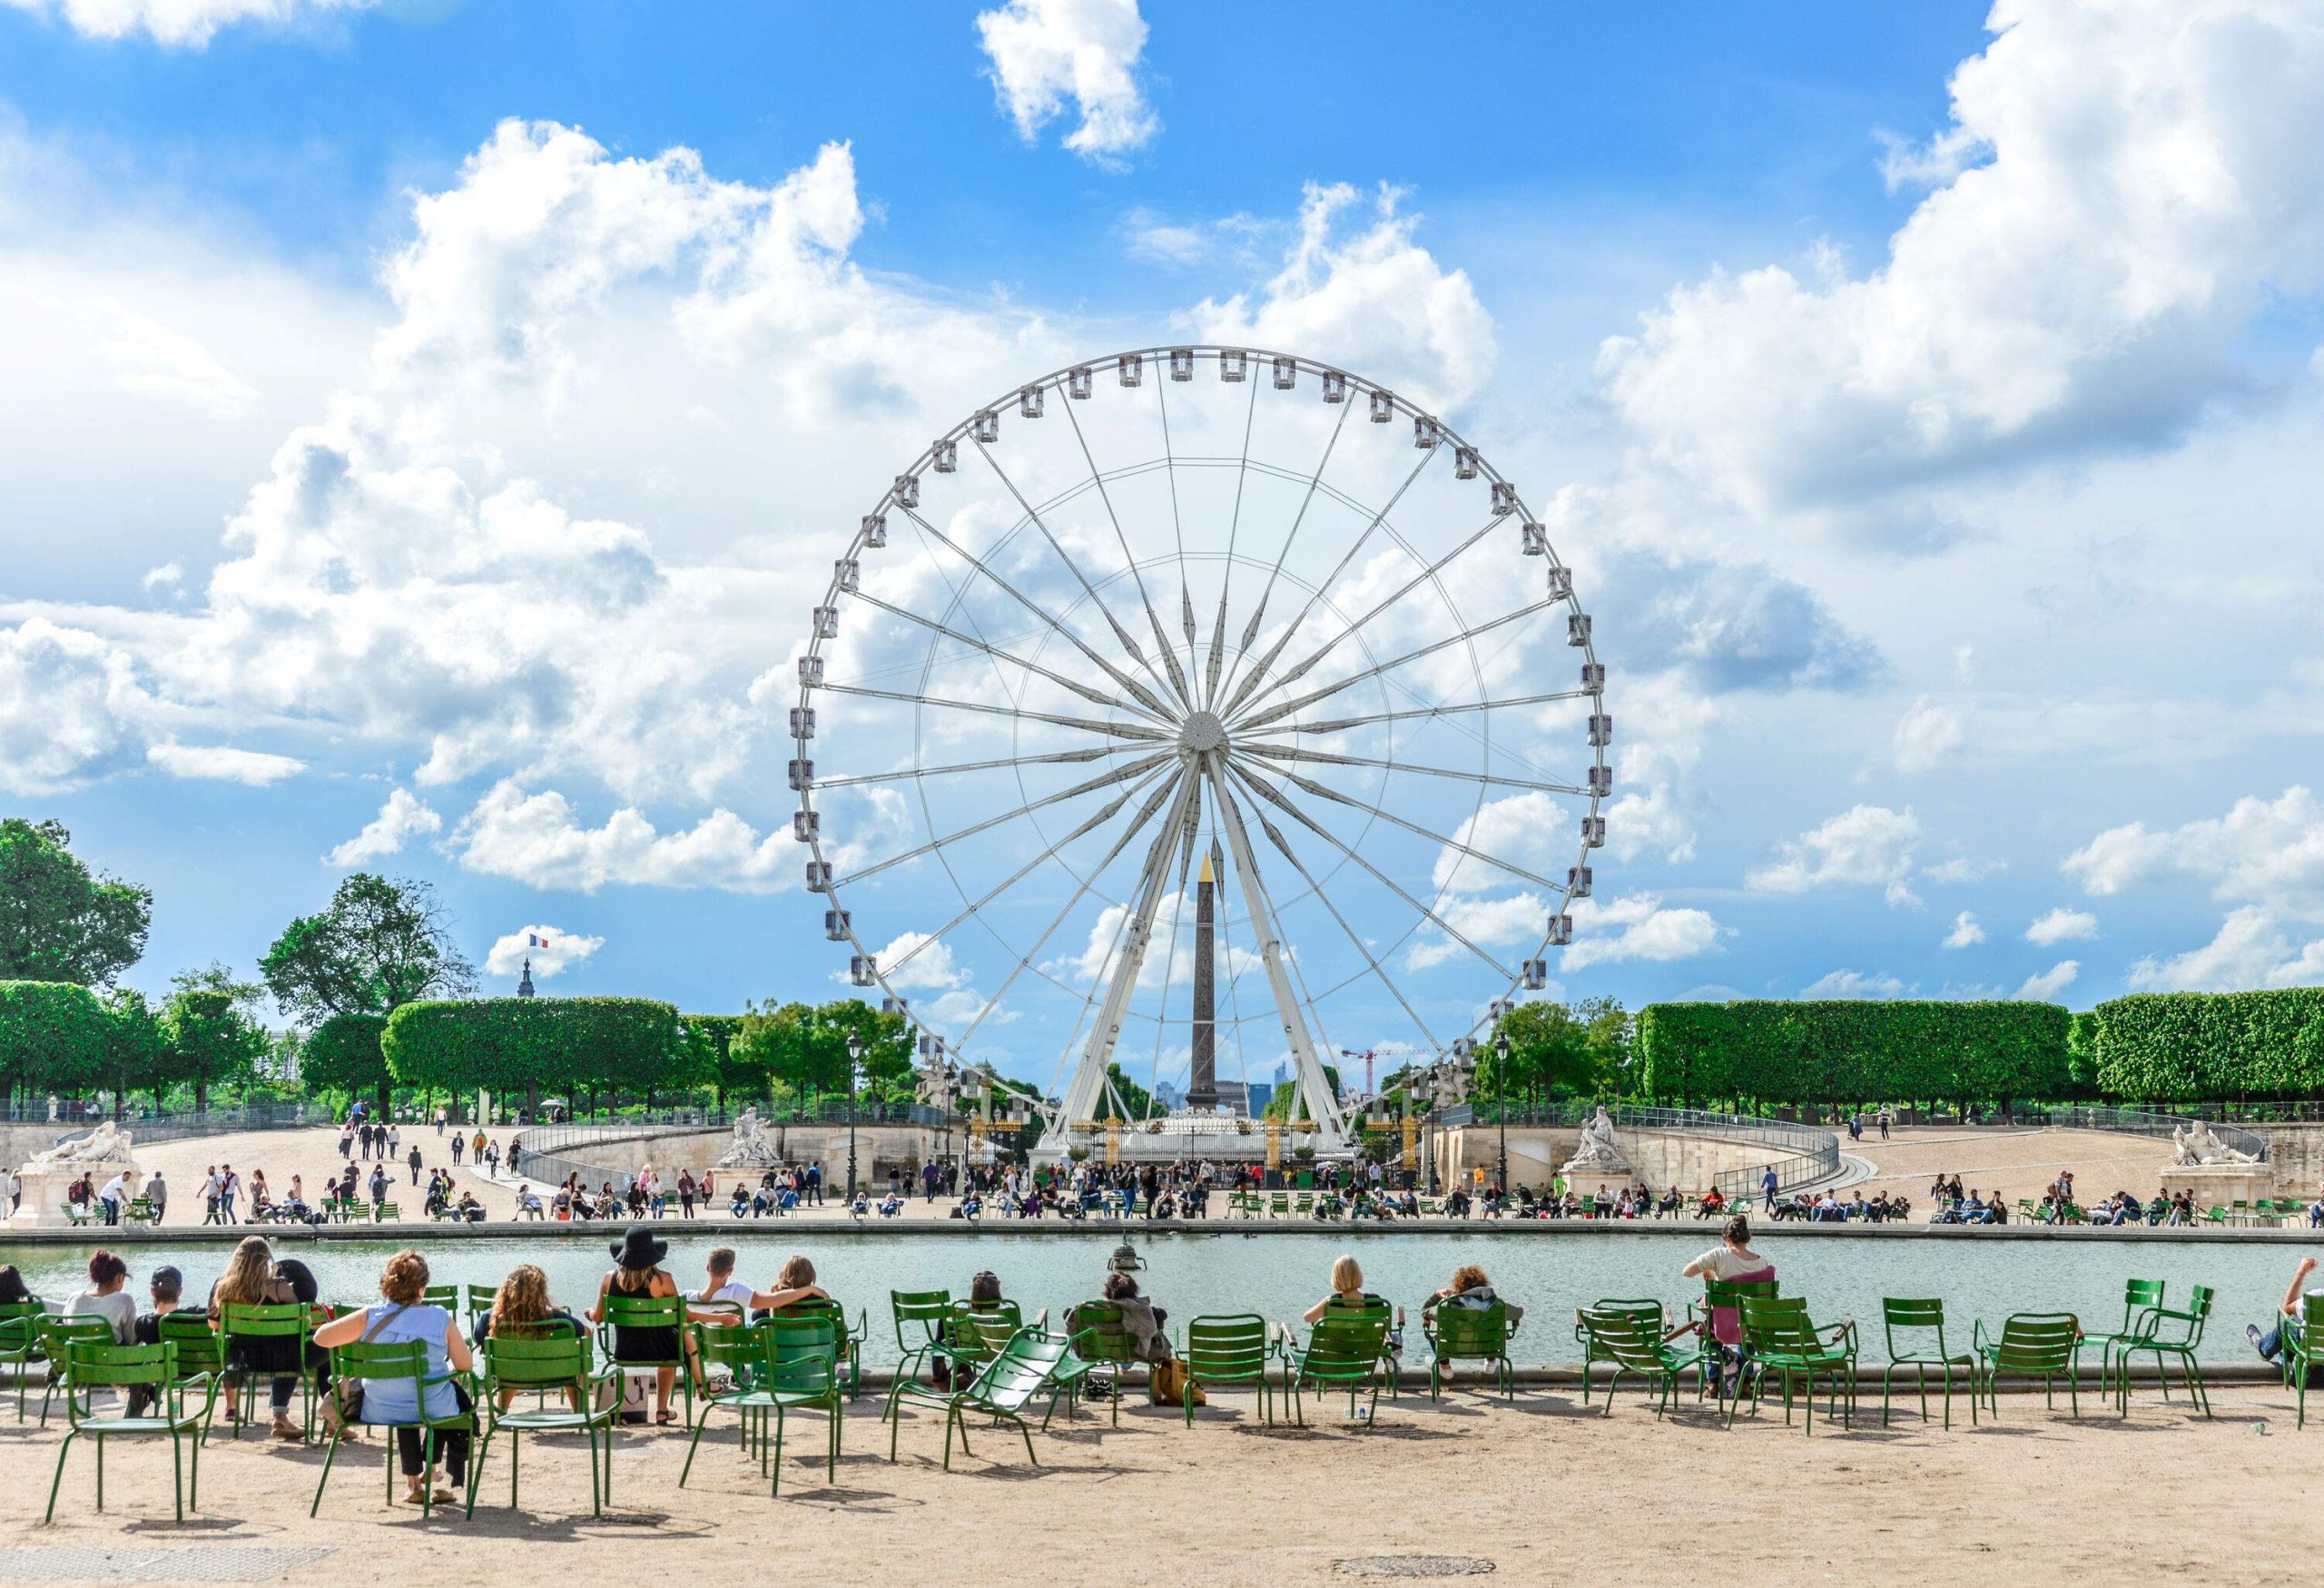 People flocked around a huge Ferris wheel alongside a pond surrounded by lush trees.